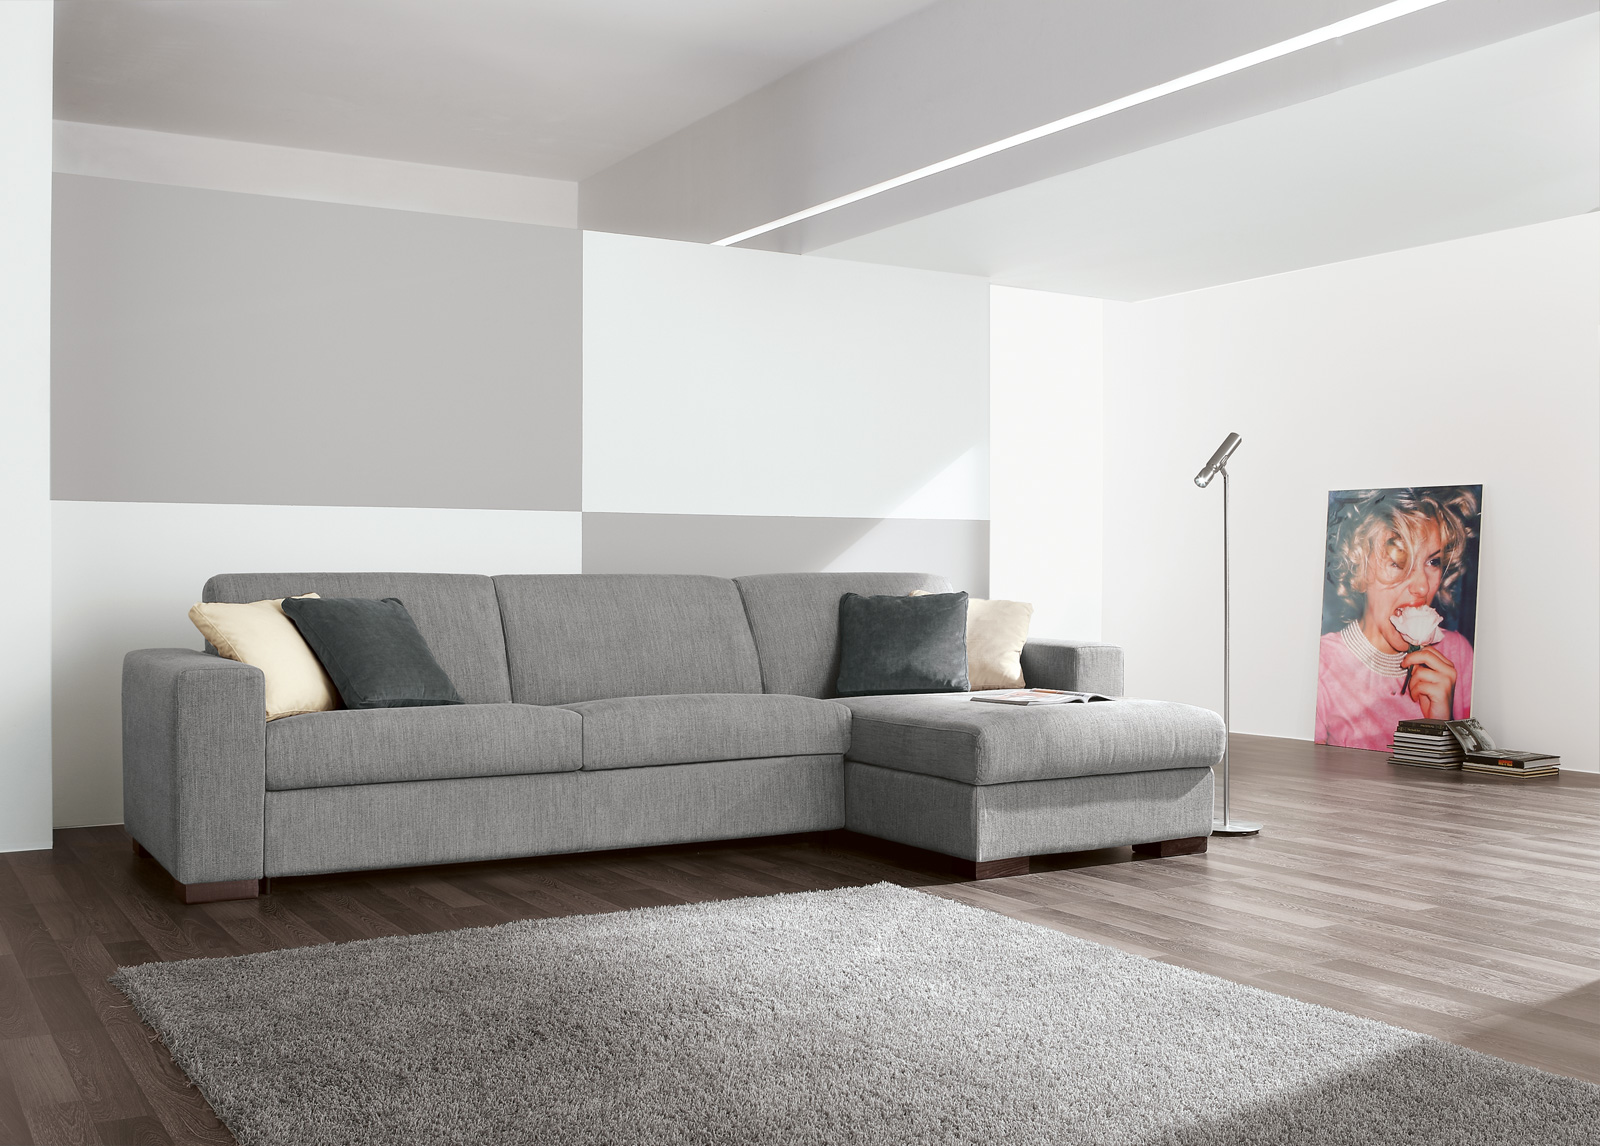 leather corner sofa in the design of the living room